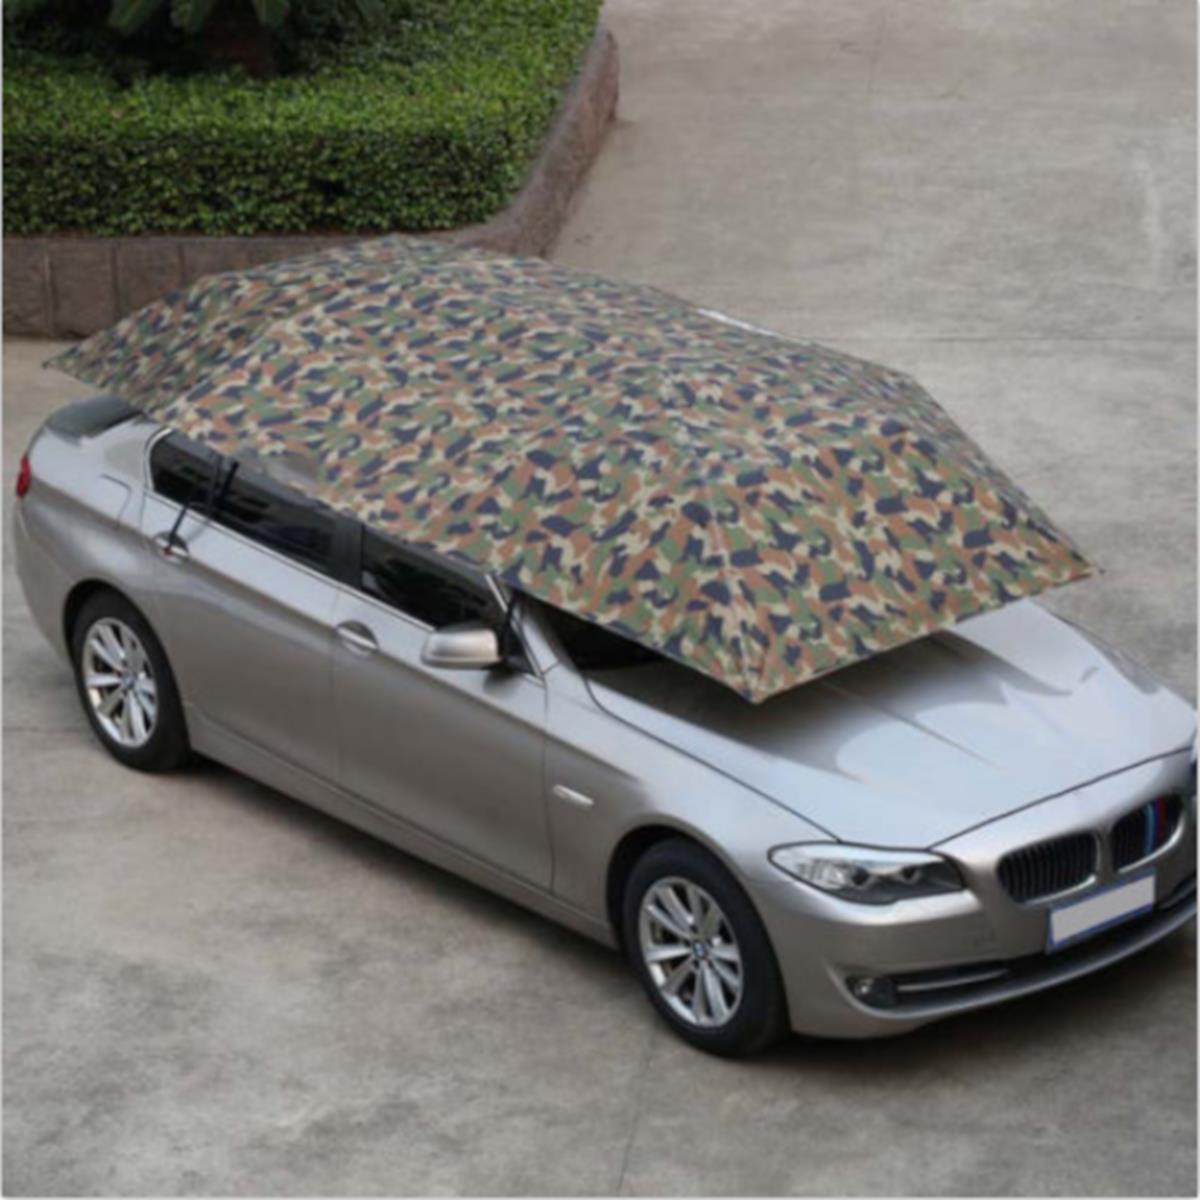 Dim Gray Extra Large UV Oxford Cloth for Car Sun Shelter Umbrella Tent Roof Cover 4.5* 2.3M